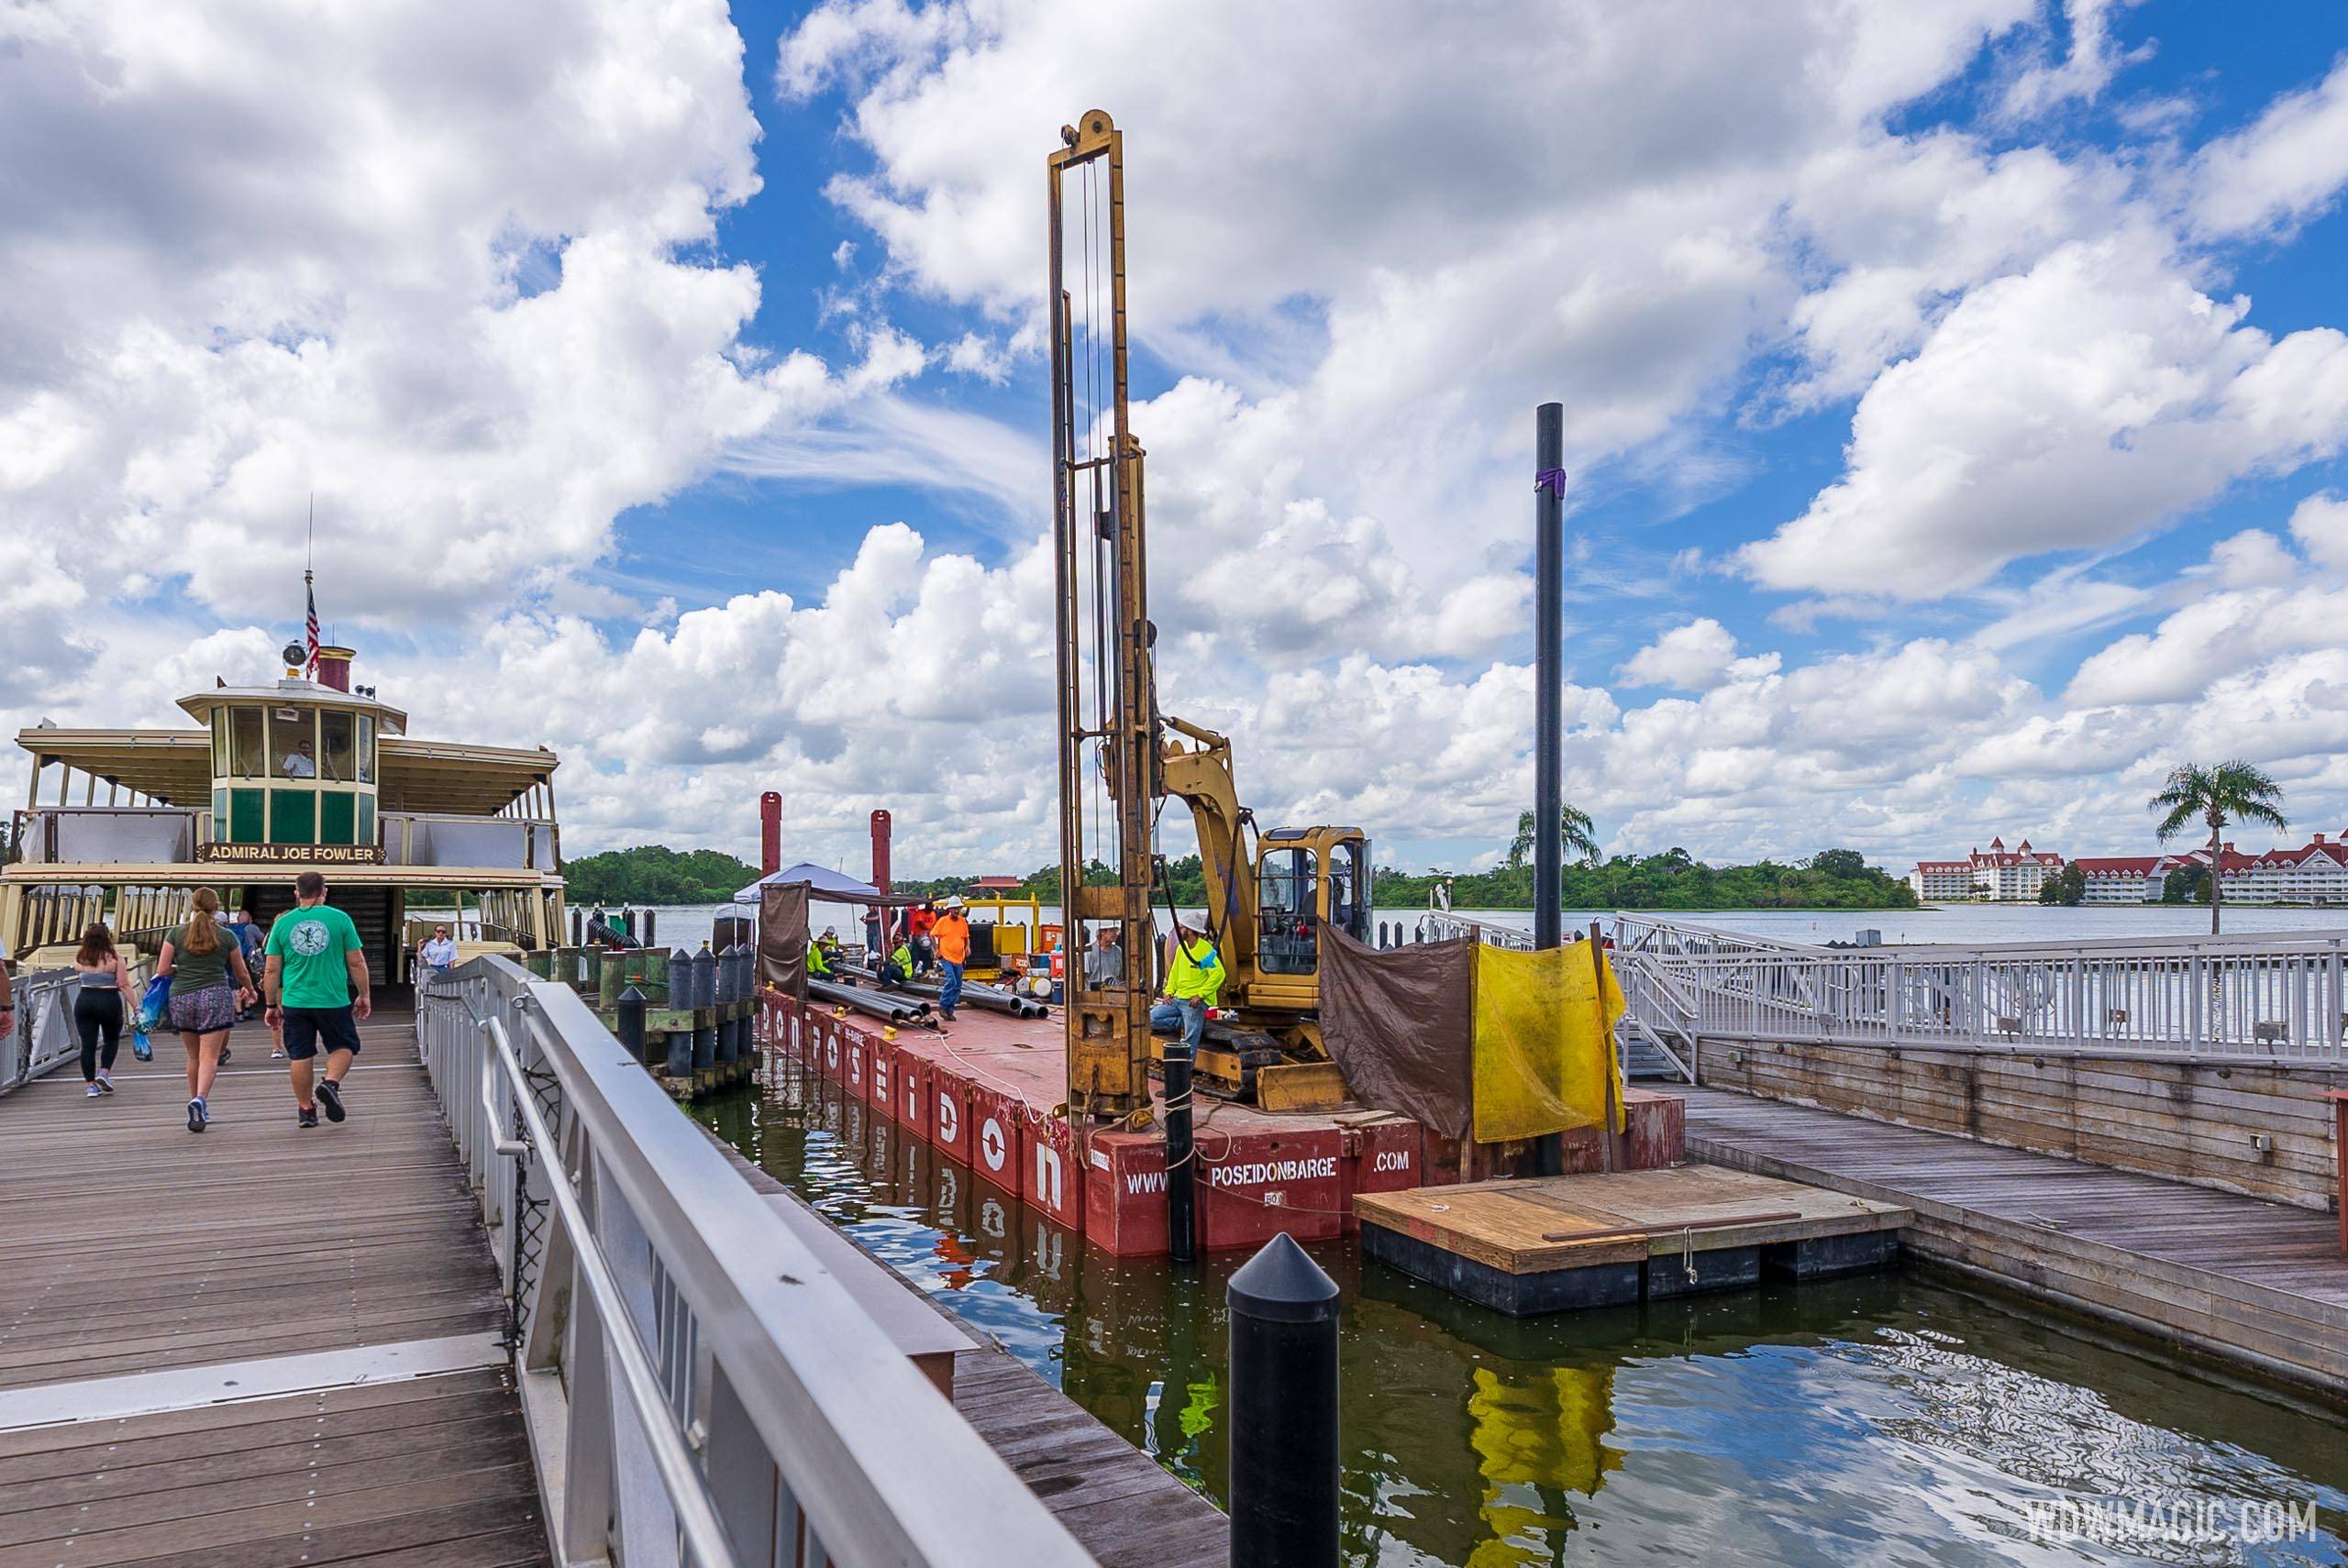 Ferry boat dock modifications at the Magic Kingdom - August 12 2021